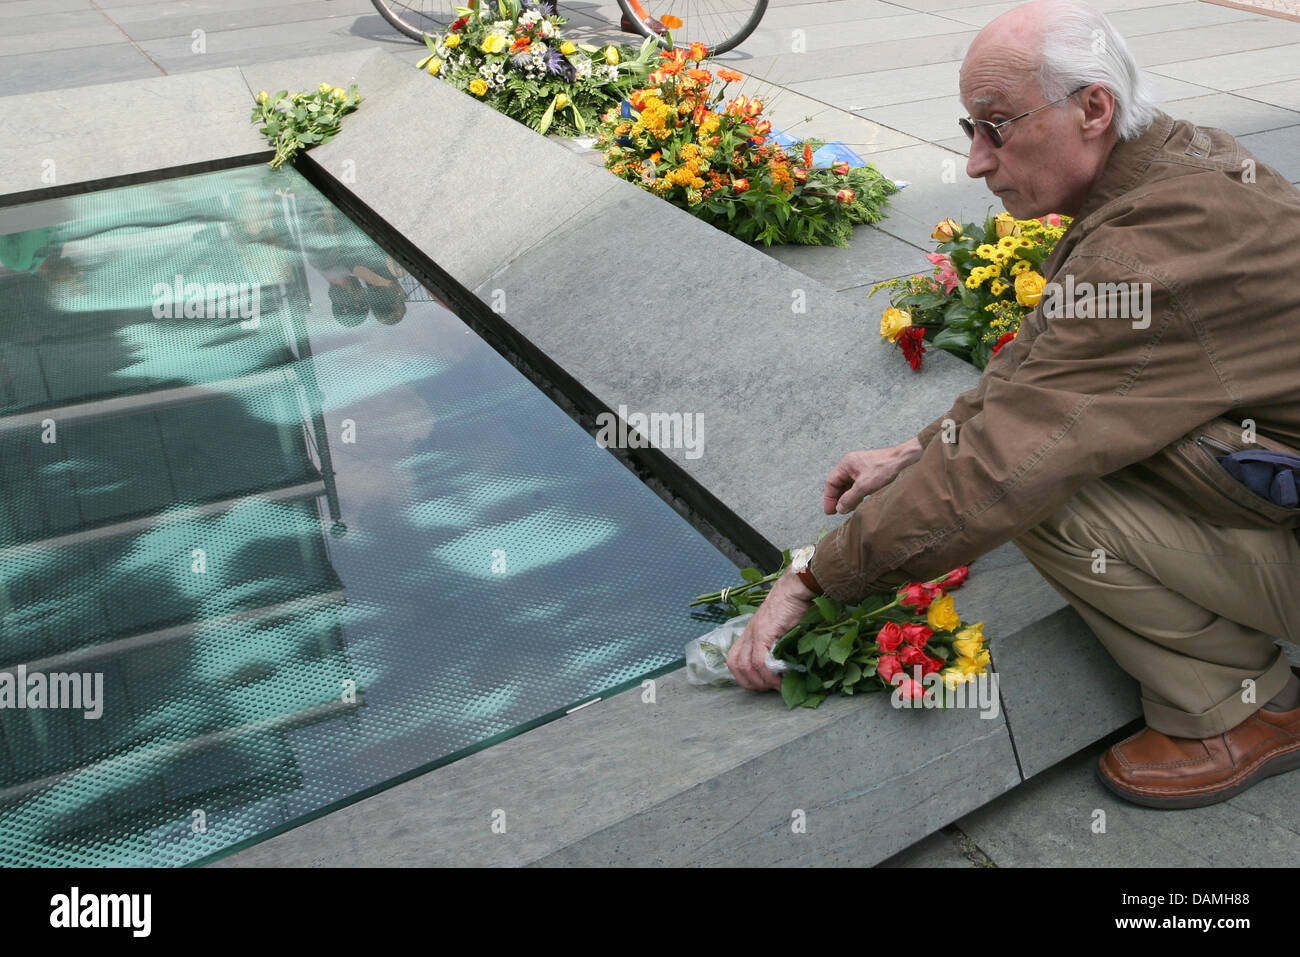 A man puts down flowers at the memorial for the uprising of 17 June 1953 in East Germany in Berlin, Germany, 16 June 2011. On 17 June 1953, Soviet troops with tanks and GDR policemen quelled a rebellion against the SED regime. Photo: Stephanie Pilick Stock Photo